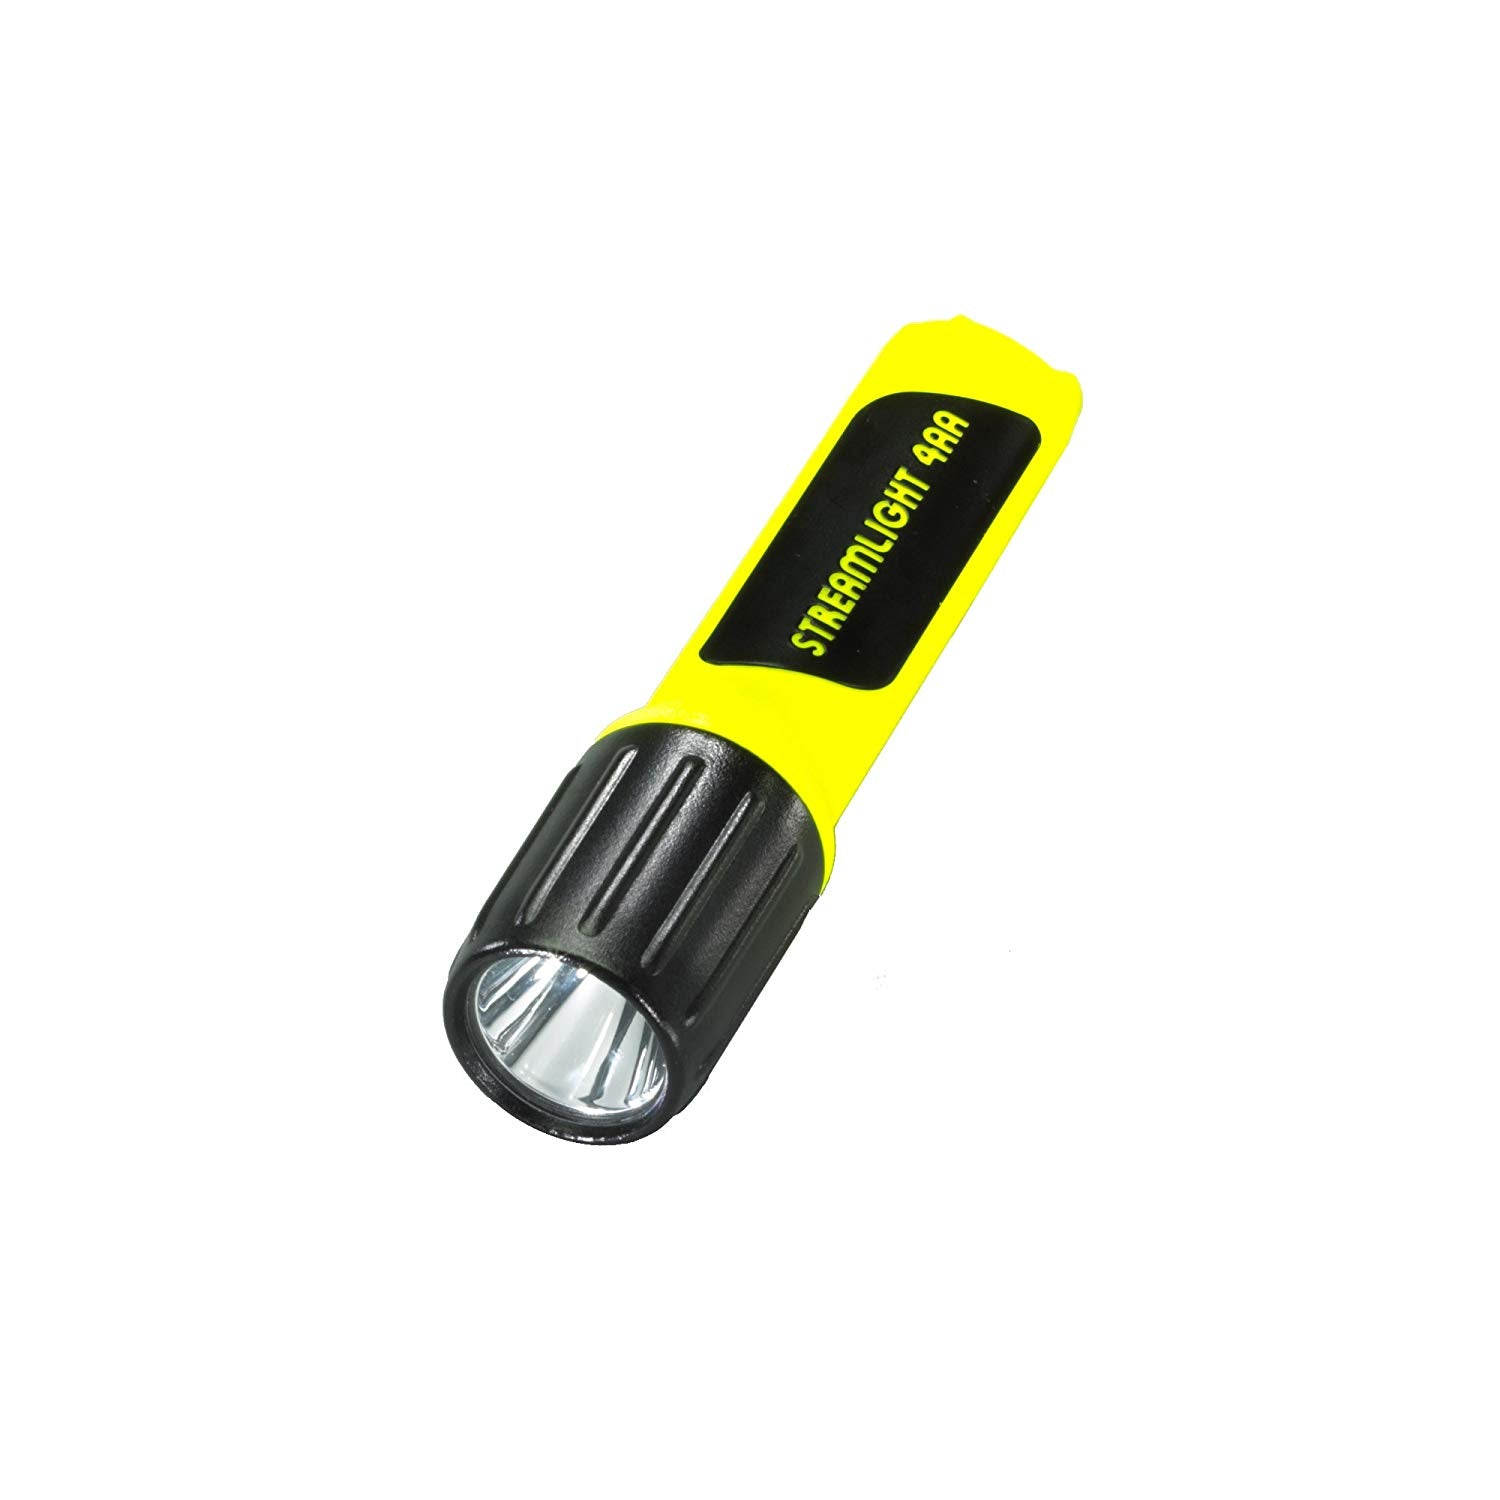 Streamlight 68244 ProPolymer C4 Lux LED Flashlight. 4AA (Included). Yellow - MPR Tools & Equipment